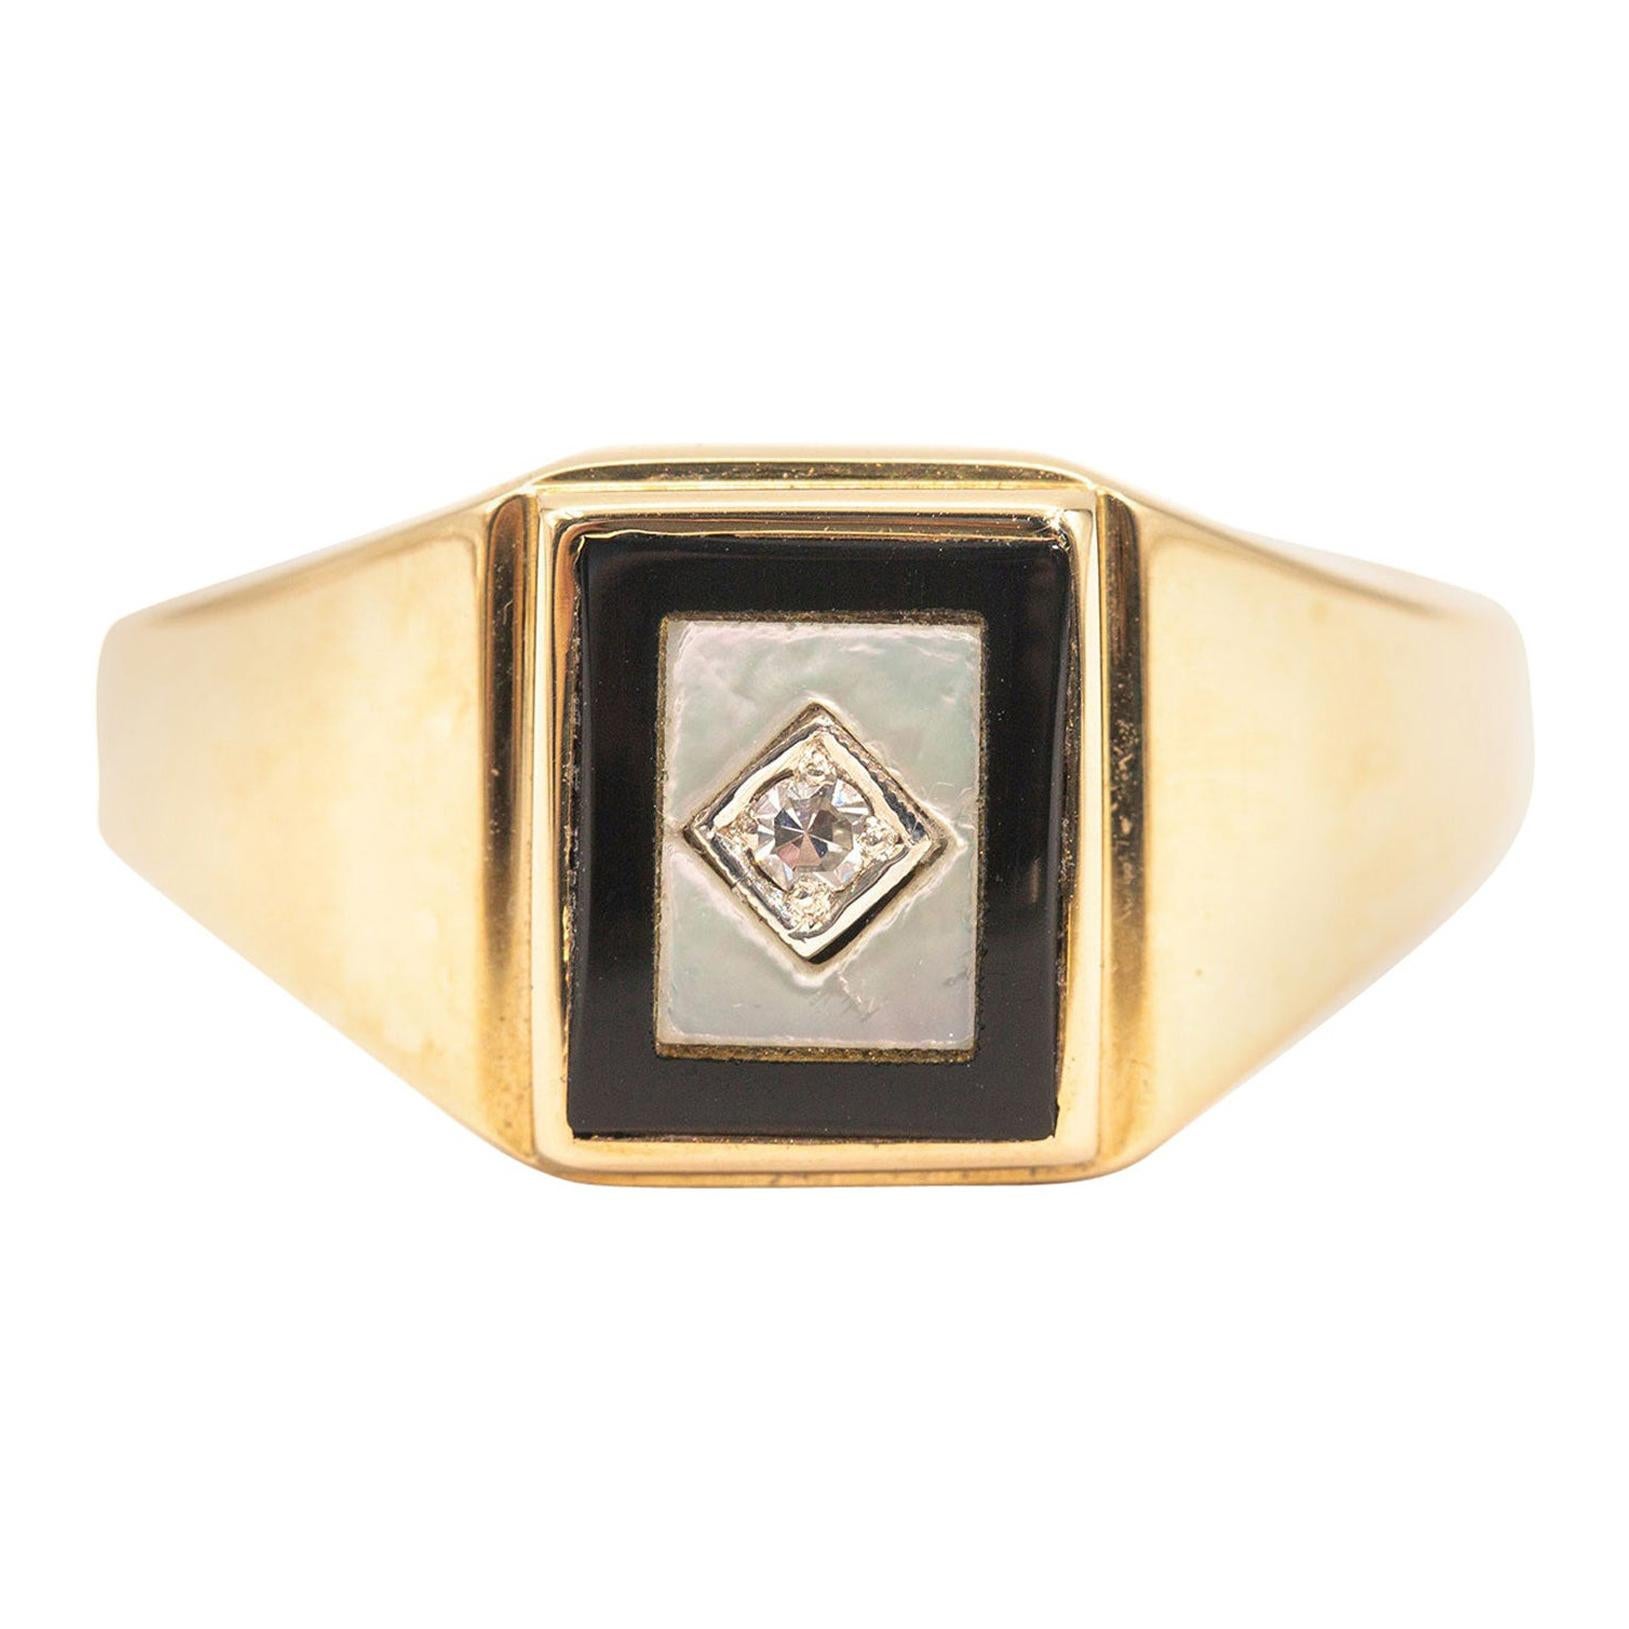 Circa 1970s 9 Carat Rose Gold Mens Rectangle Shaped Signet Ring – Imperial  Jewellery